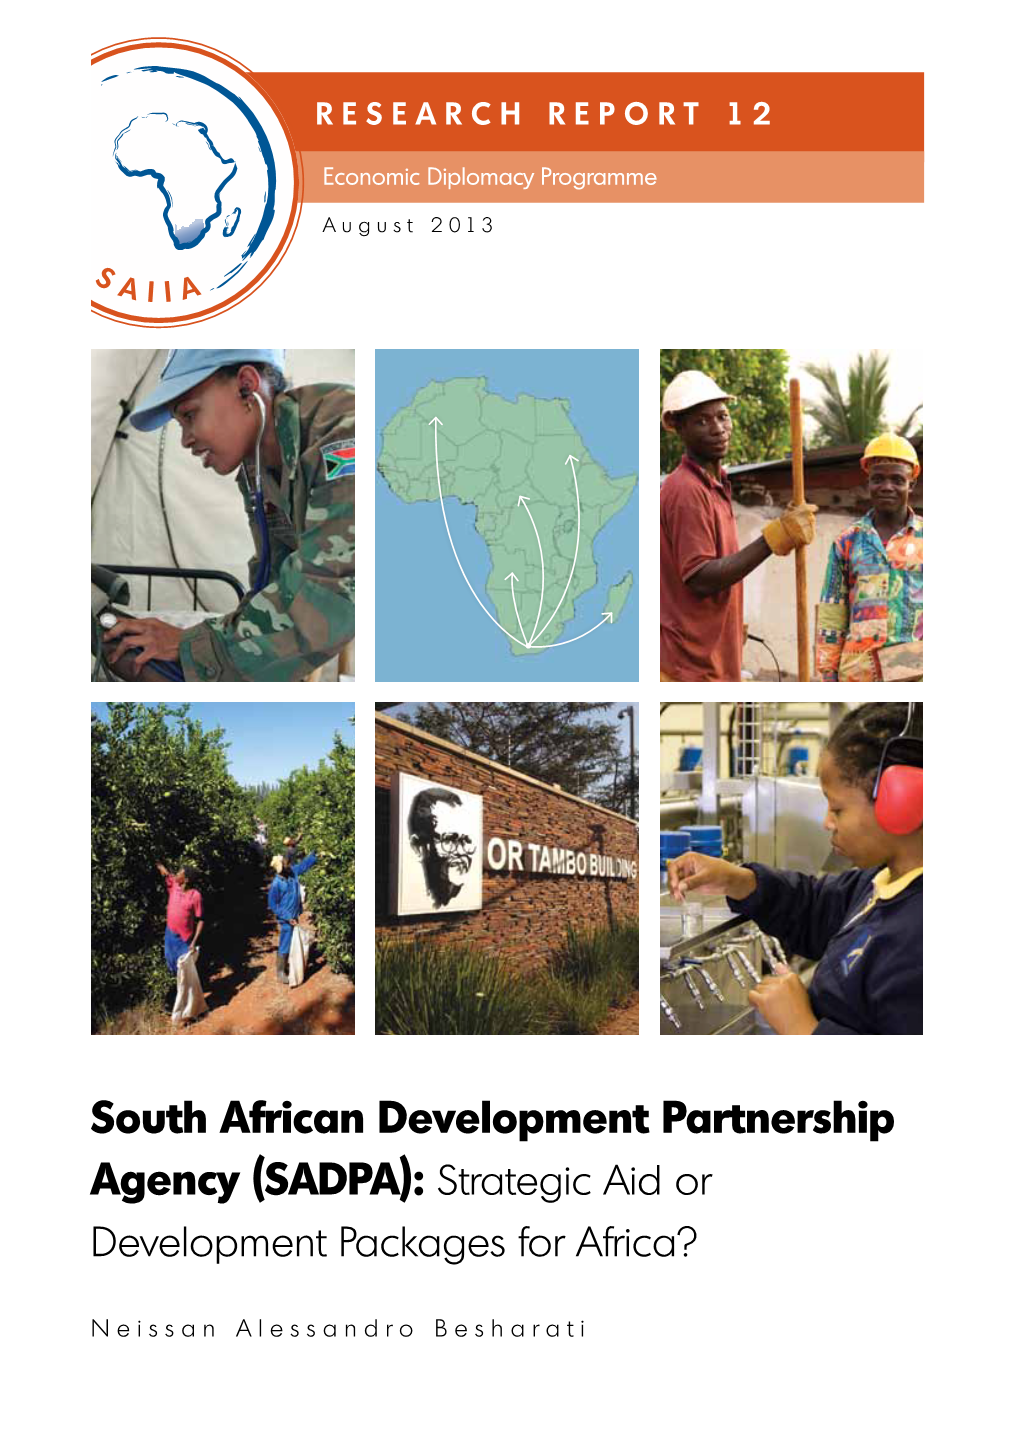 South African Development Partnership Agency (SADPA): Strategic Aid Or Development Packages for Africa?